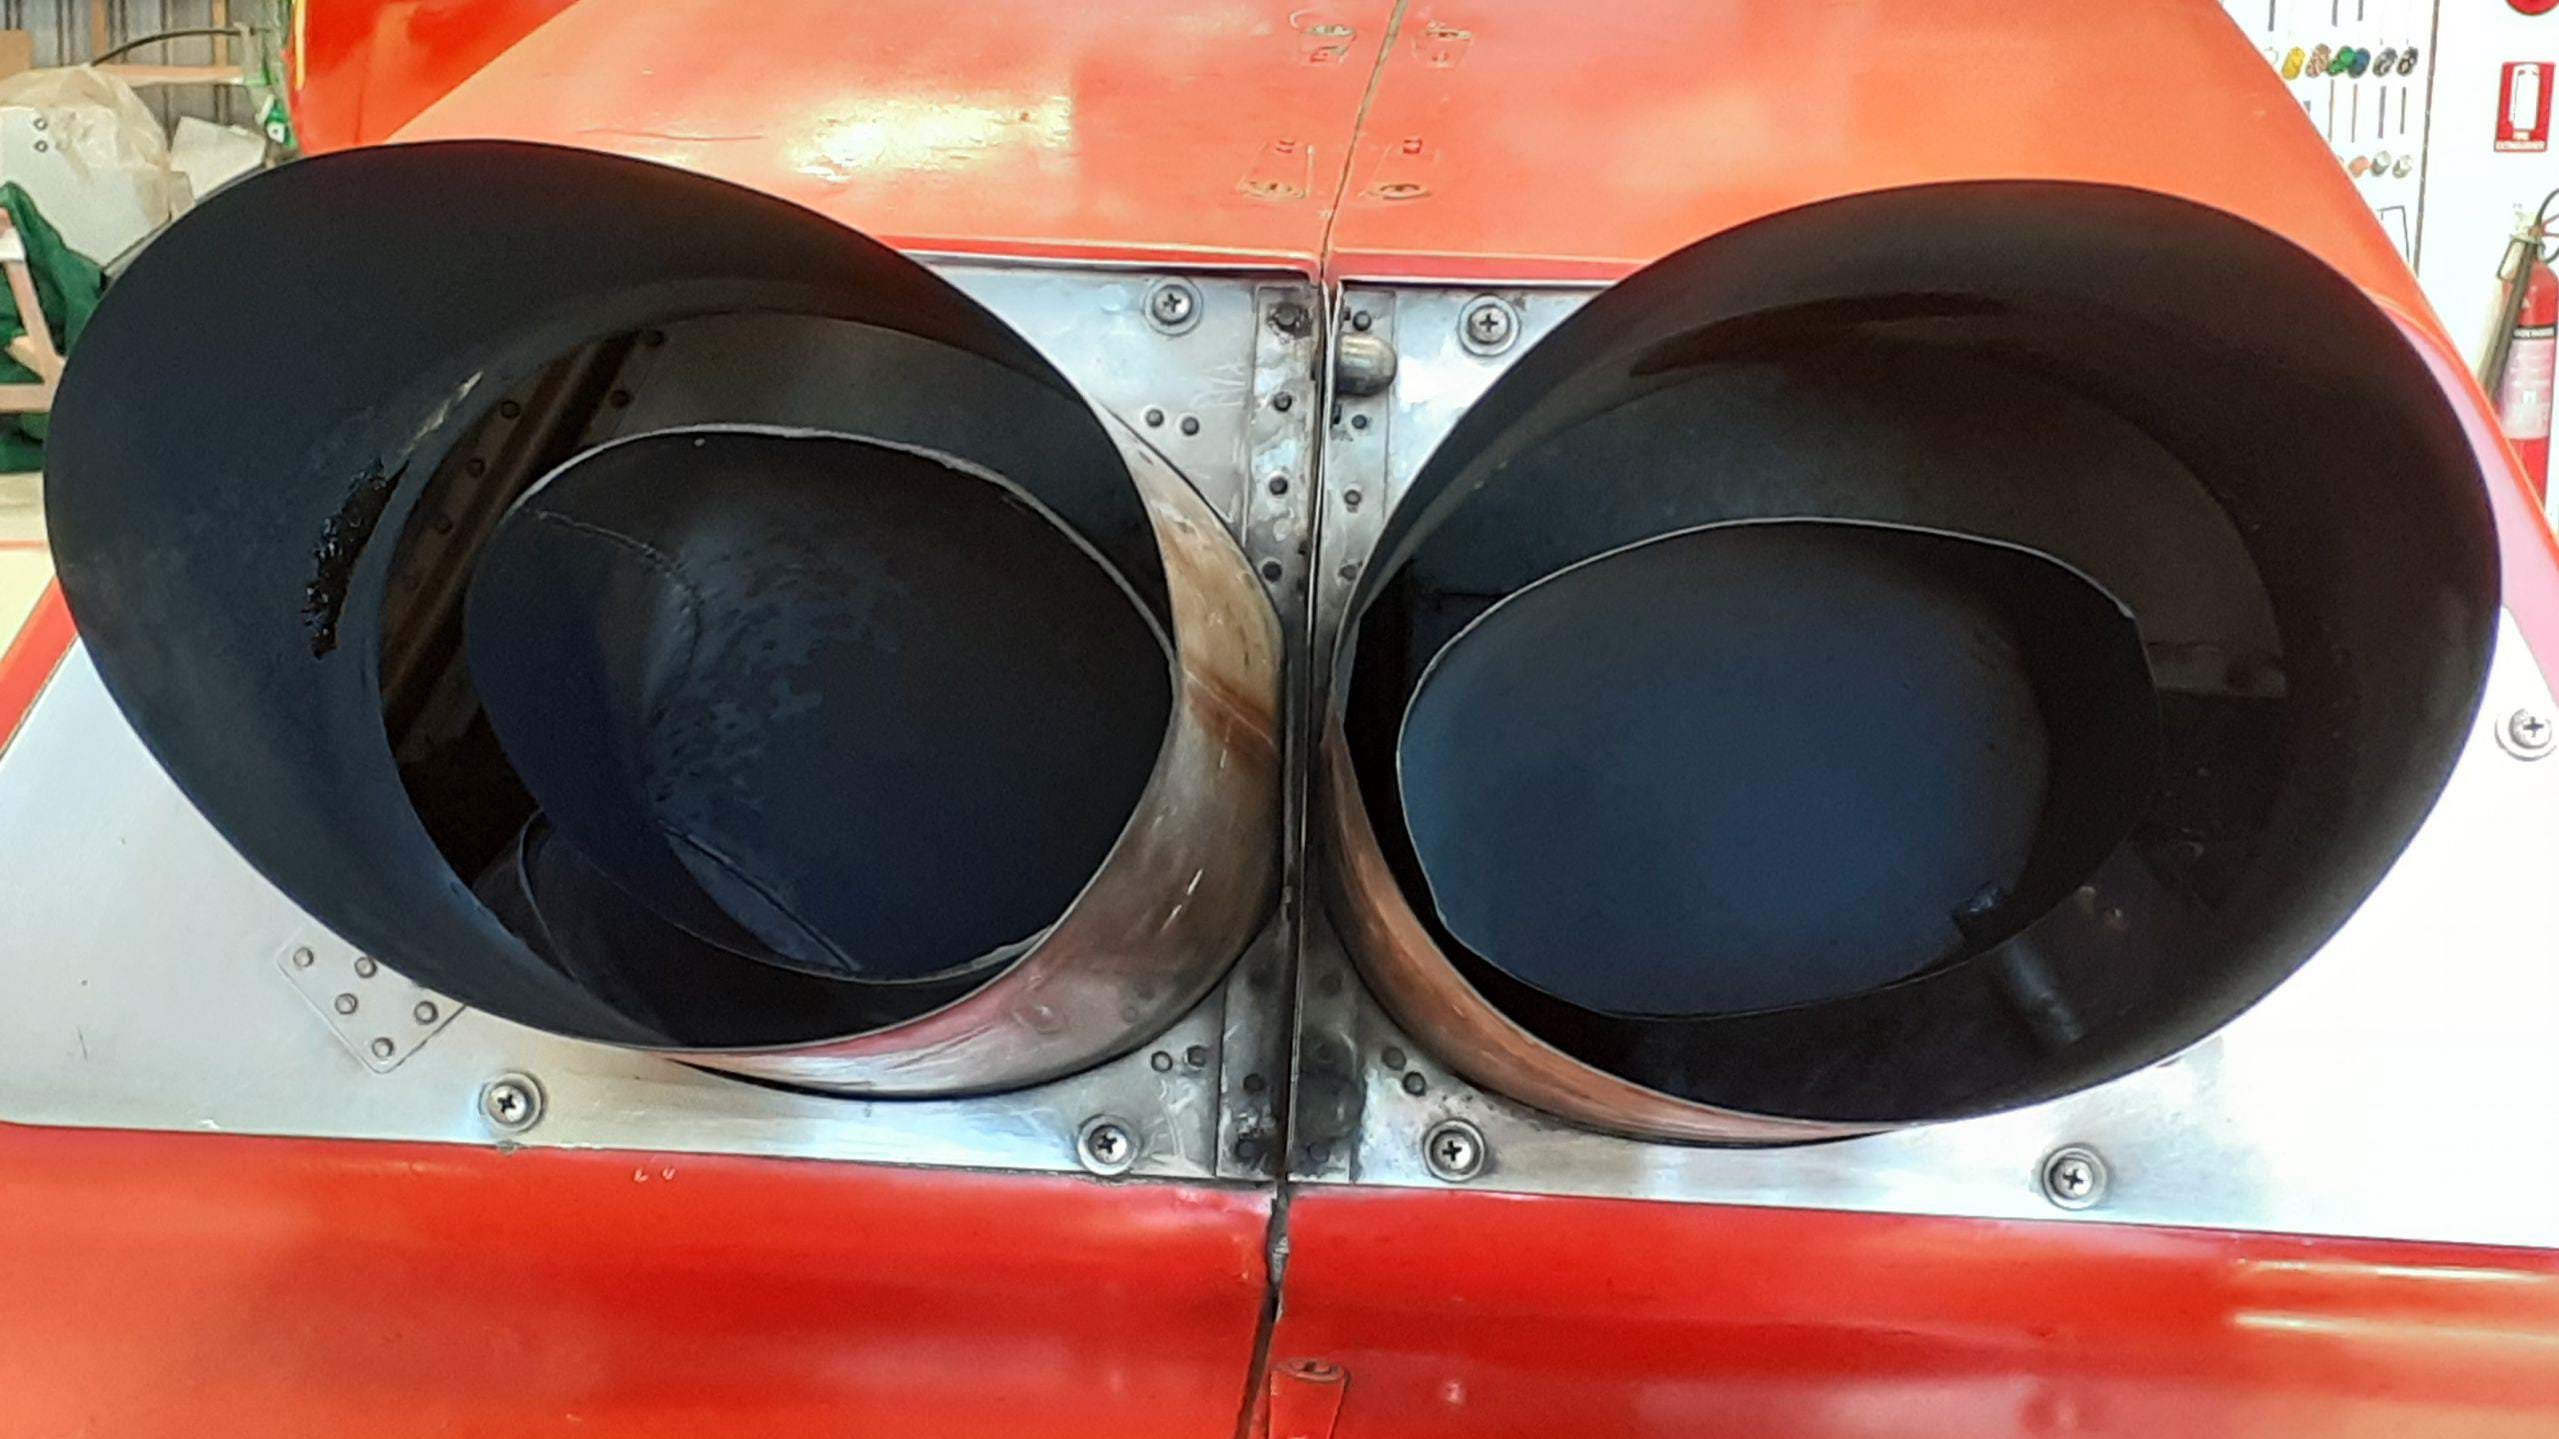 Exhausts of the real Bo 105